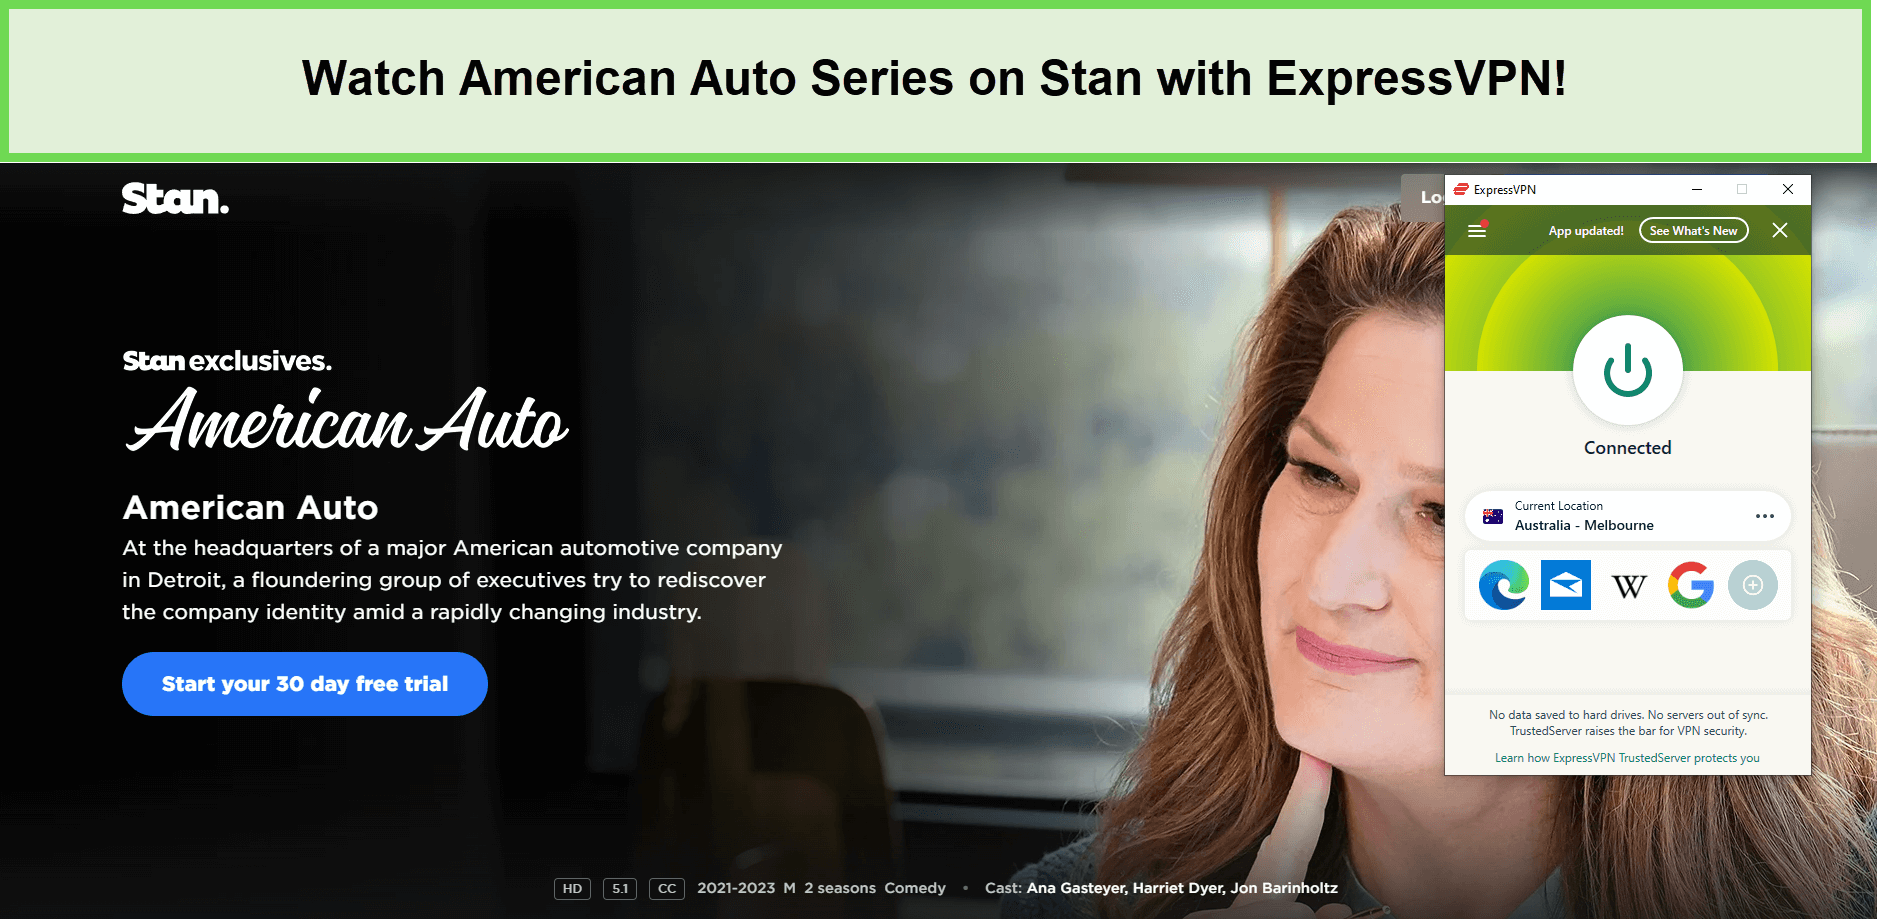 Watch-American-Auto-Series-in-Singapore-on-Stan-with-ExpressVPN